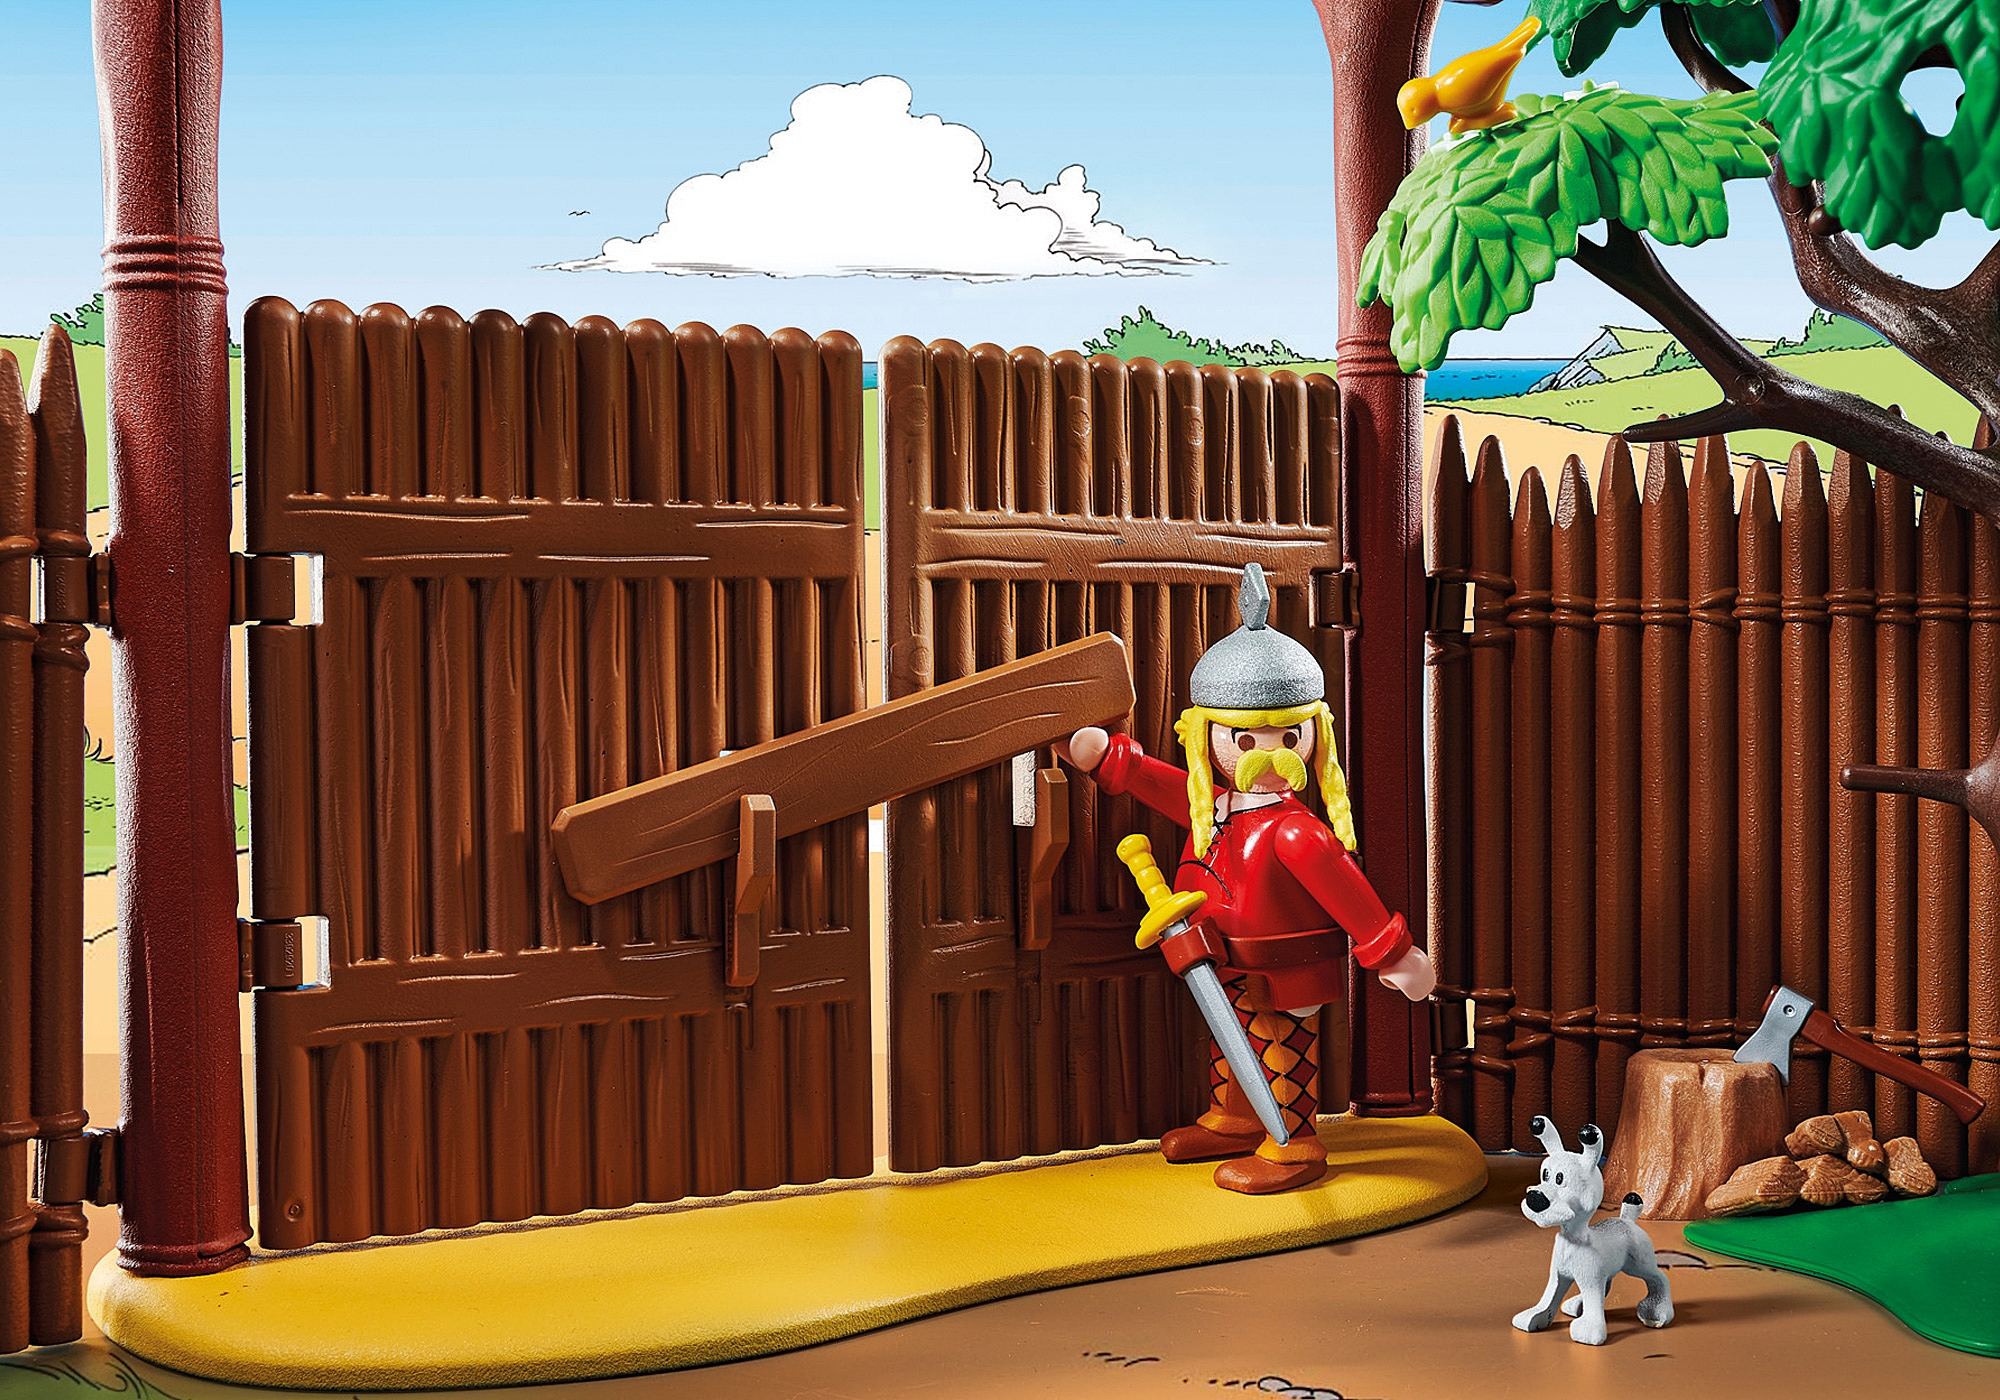 Playmobil FunPark Malta - 💥The popular Adventures of Asterix comic series  arrived to Playmobil! French Popular Culture inseparable trio of friends  Asterix the Gaul, Obelix and Idefix are having unforgettable adventures in